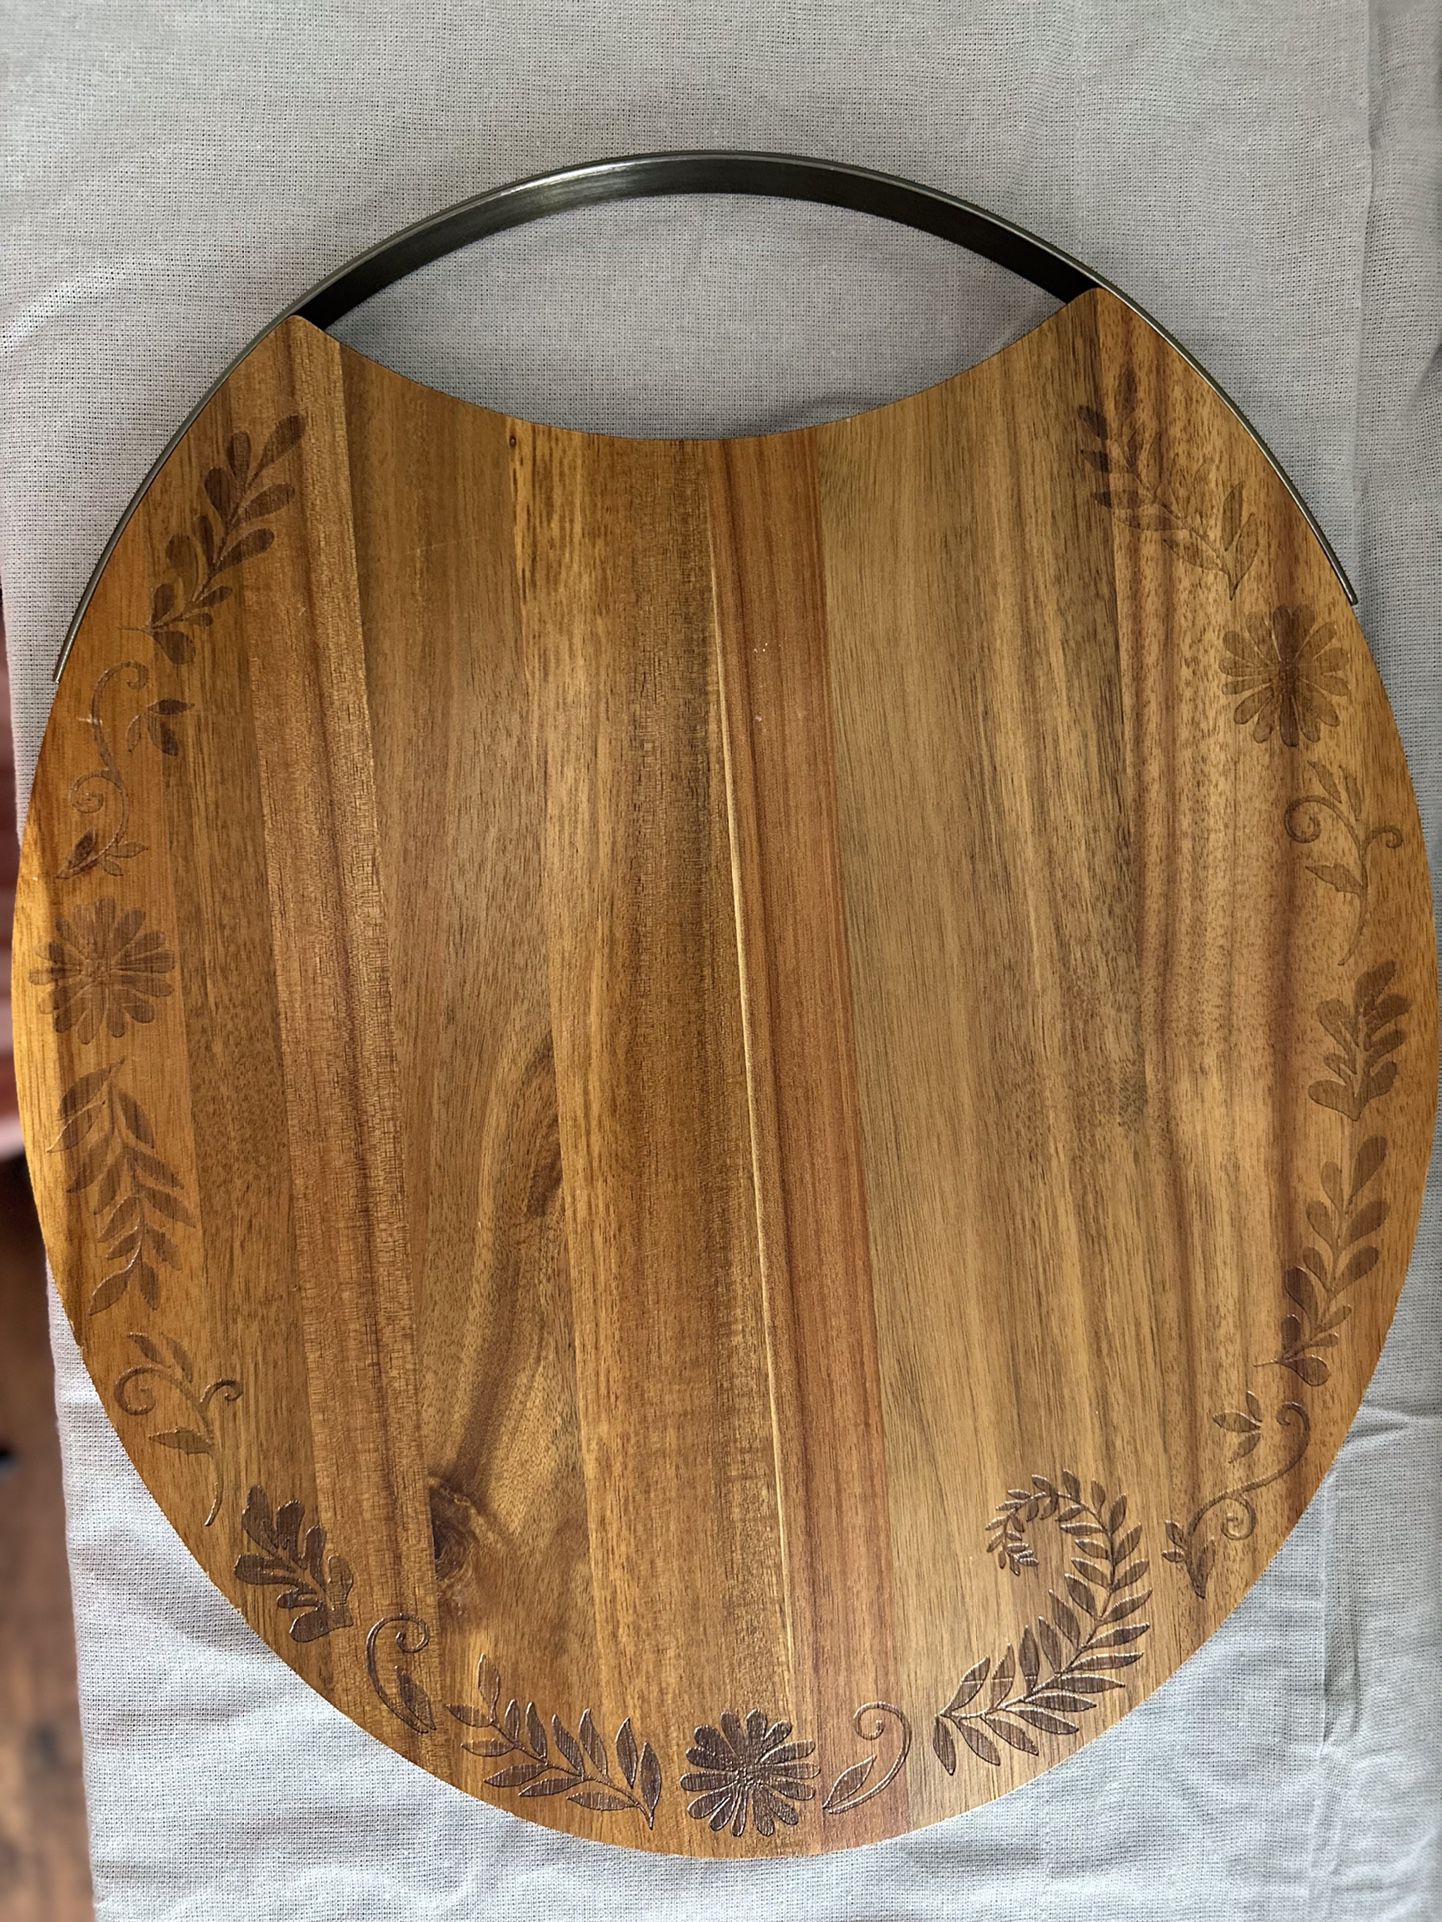 Woodland Whimsy Serving Board